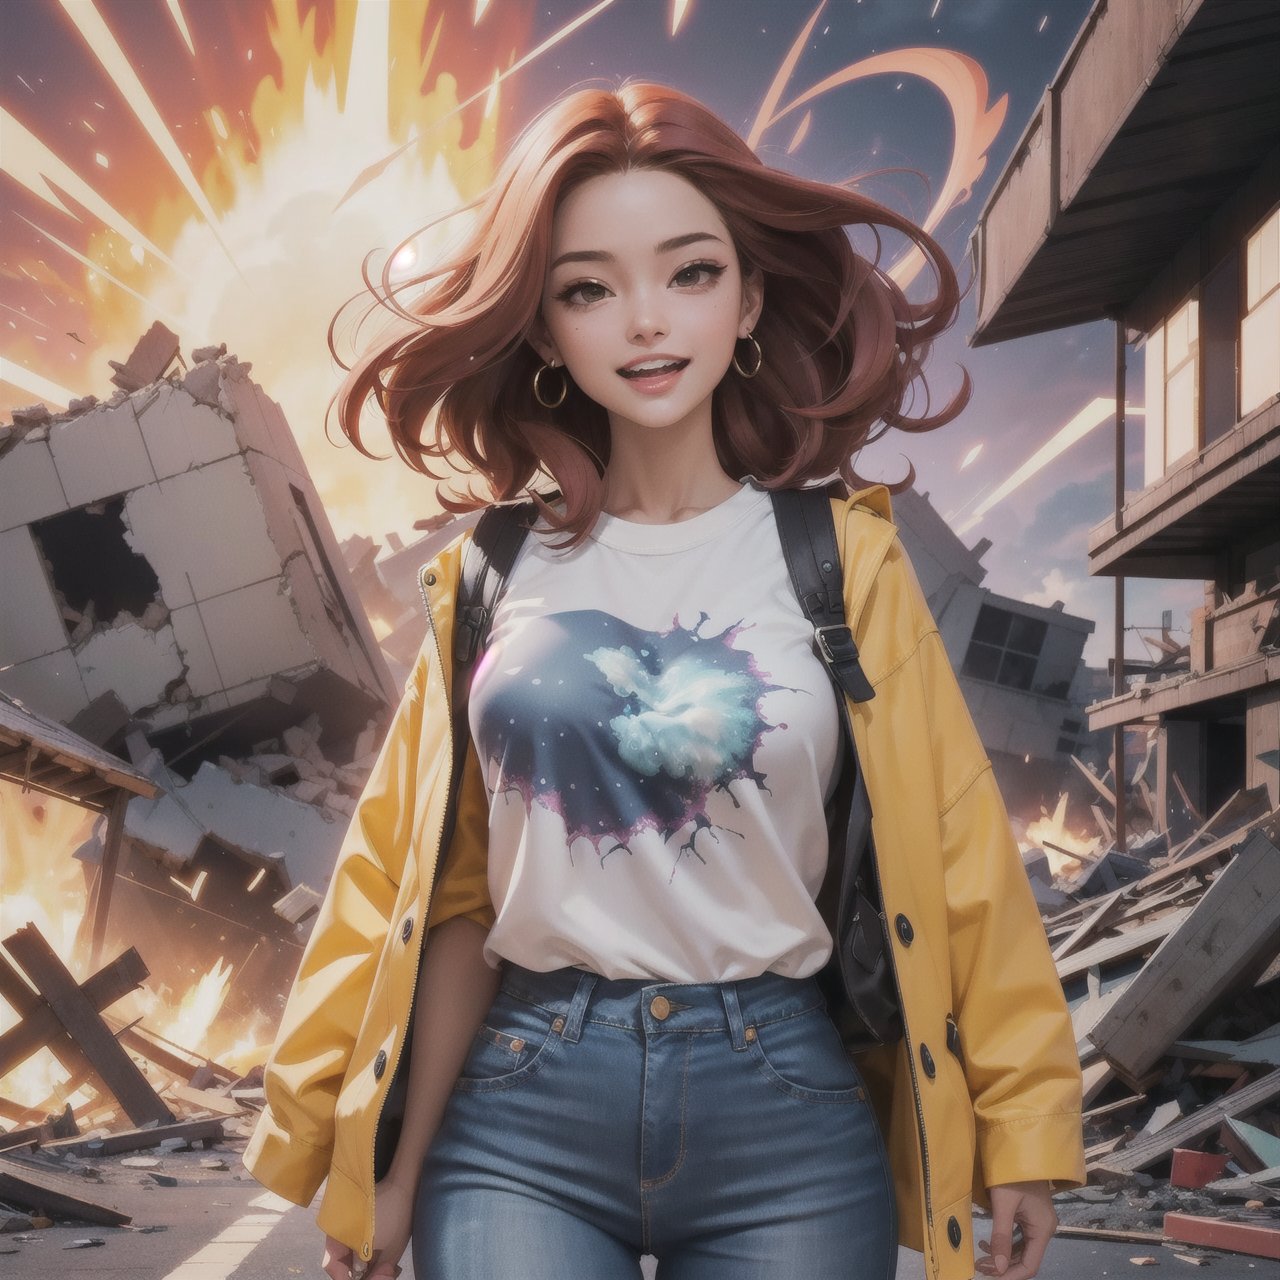 (masterpiece, best quality:1.4), (beautiful, aesthetic, perfect, delicate, intricate:1.2),((atomic explosion in background)), (mass destruction, collapsing buildings, disaster, nightmare, vivid colours), (high contrast), 2 beautiful women, tshirt, blue_jeans, skipping toward camera, laughing at their mobile phones, smiling, perfect face, eyeliner, long wavy windswept red hair, large_breasts, depth of field